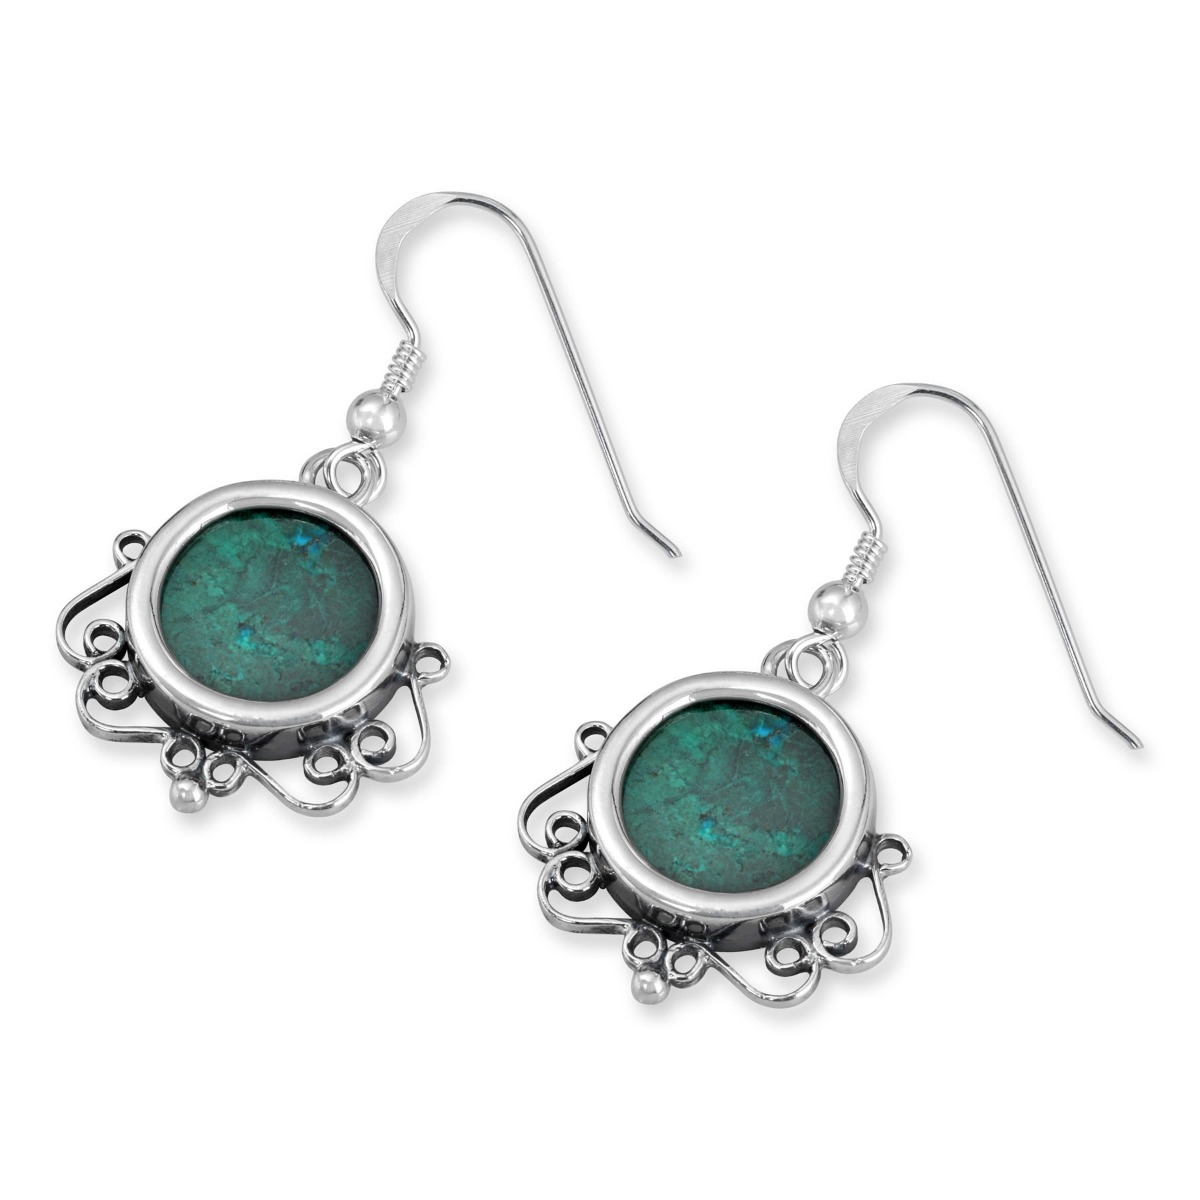 Rafael Jewelry Classical Sterling Silver and Eilat Stone Satelite Earrings  - 1